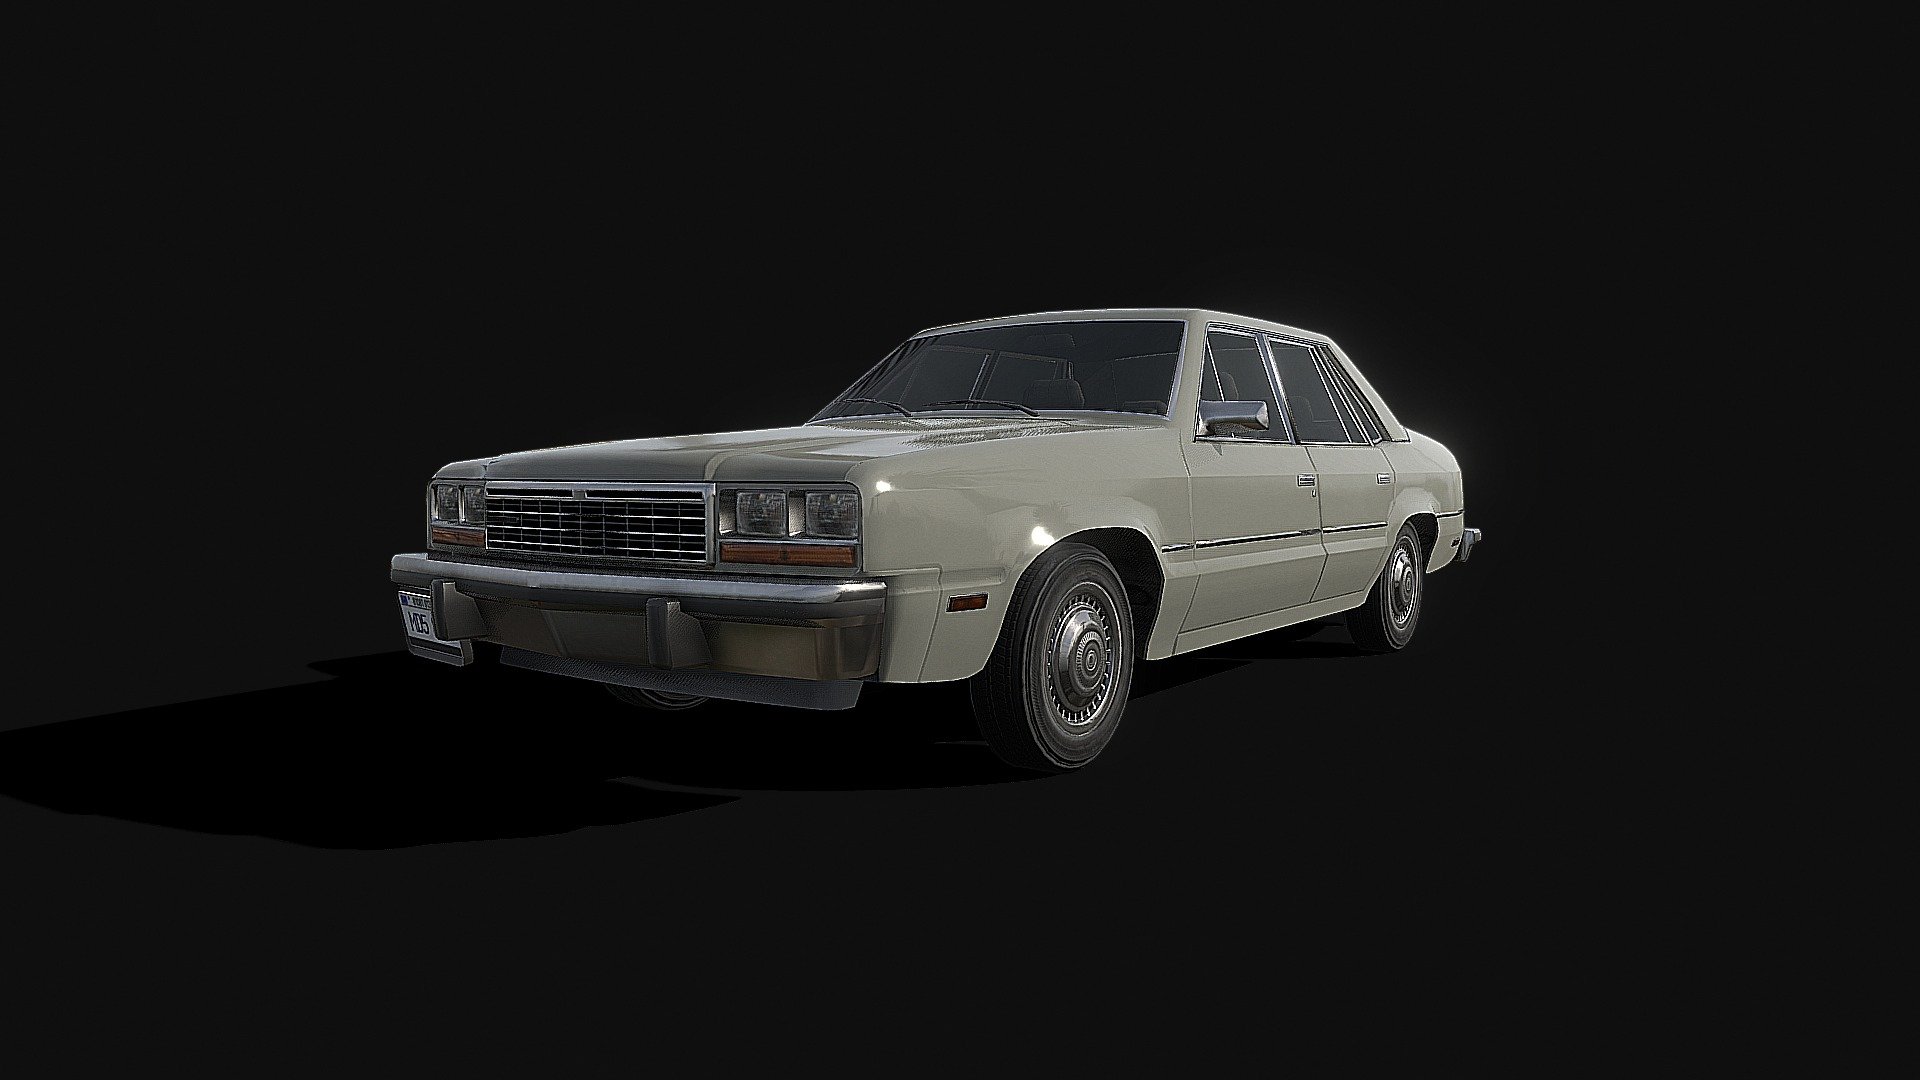 Police car build on fox platform and based on 80s Lincoln Zephyr - Ford LTD design features. The model was made in order to see how features from full-size would look on a compact fox platform, and as a result, I brought the model into a low-poly asset for further use. Use the model as you see fit and have a nice day.
PS: That model is civil version of this car: https://sketchfab.com/3d-models/80s-generic-police-car-low-poly-model-61766c1e6e1e4b2b803c174f33433a74 - 80s Generic midsize sedan - Low poly model - Download Free 3D model by Daniel Zhabotinsky (@DanielZhabotinsky) 3d model